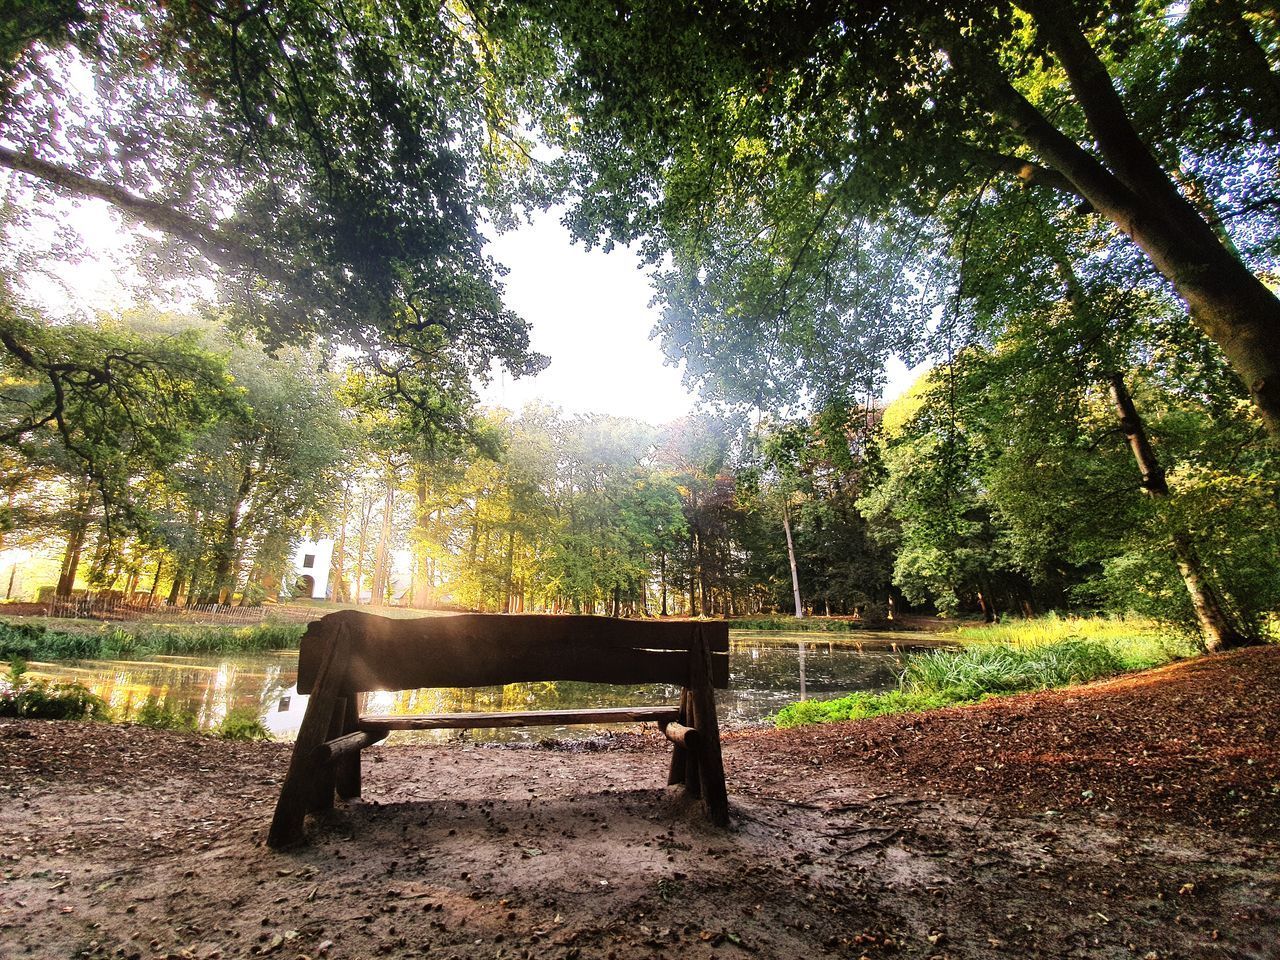 EMPTY BENCH IN PARK AGAINST TREES IN SUNLIGHT